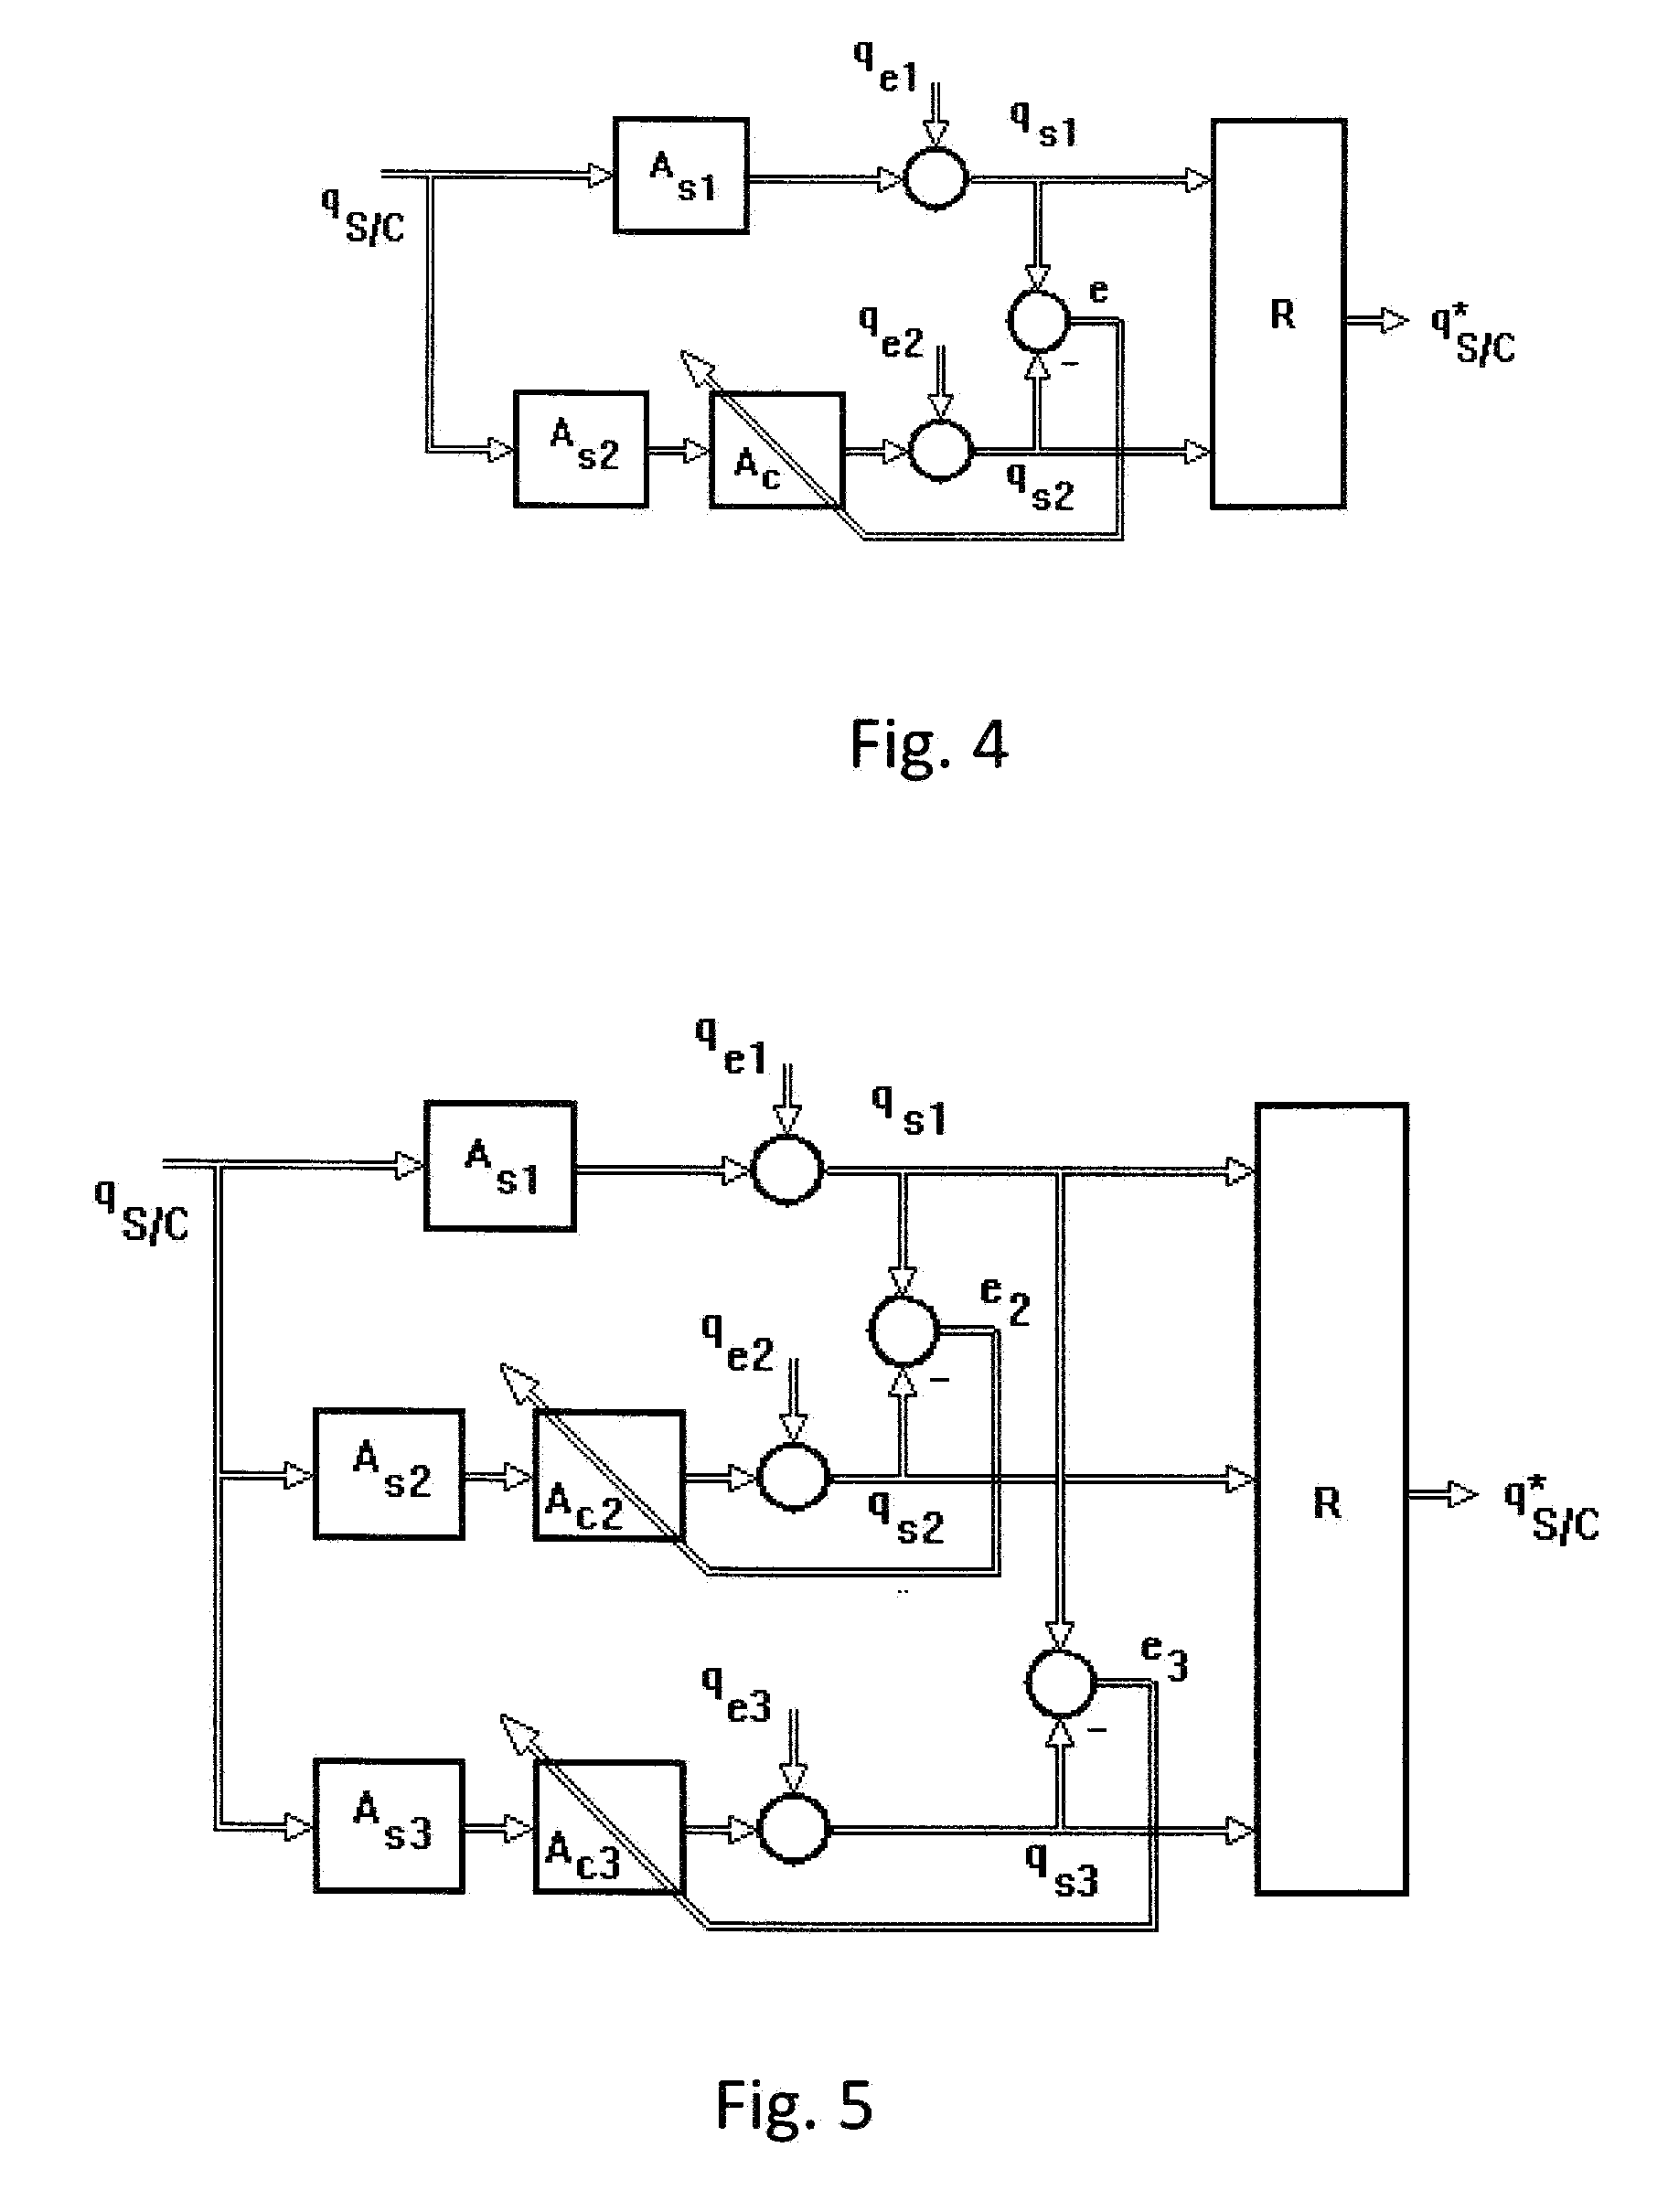 Method for the automatic correction of alignment errors in star tracker systems